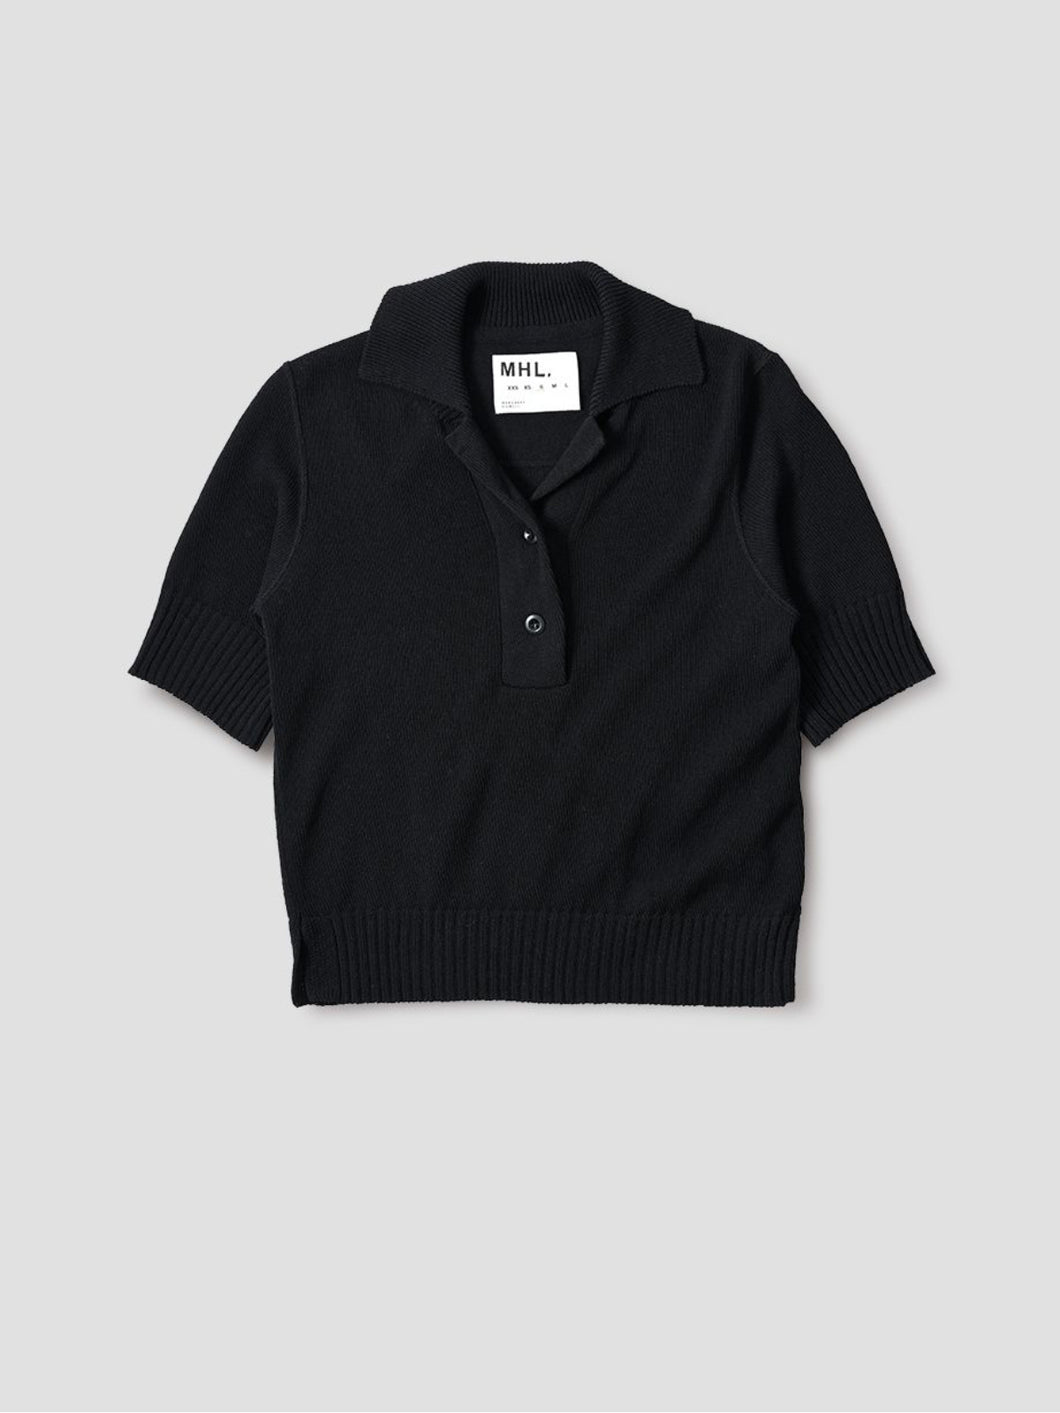 Margaret-Howell-MHL-Wide-Placket-Polo-Cotton-Wool-Black